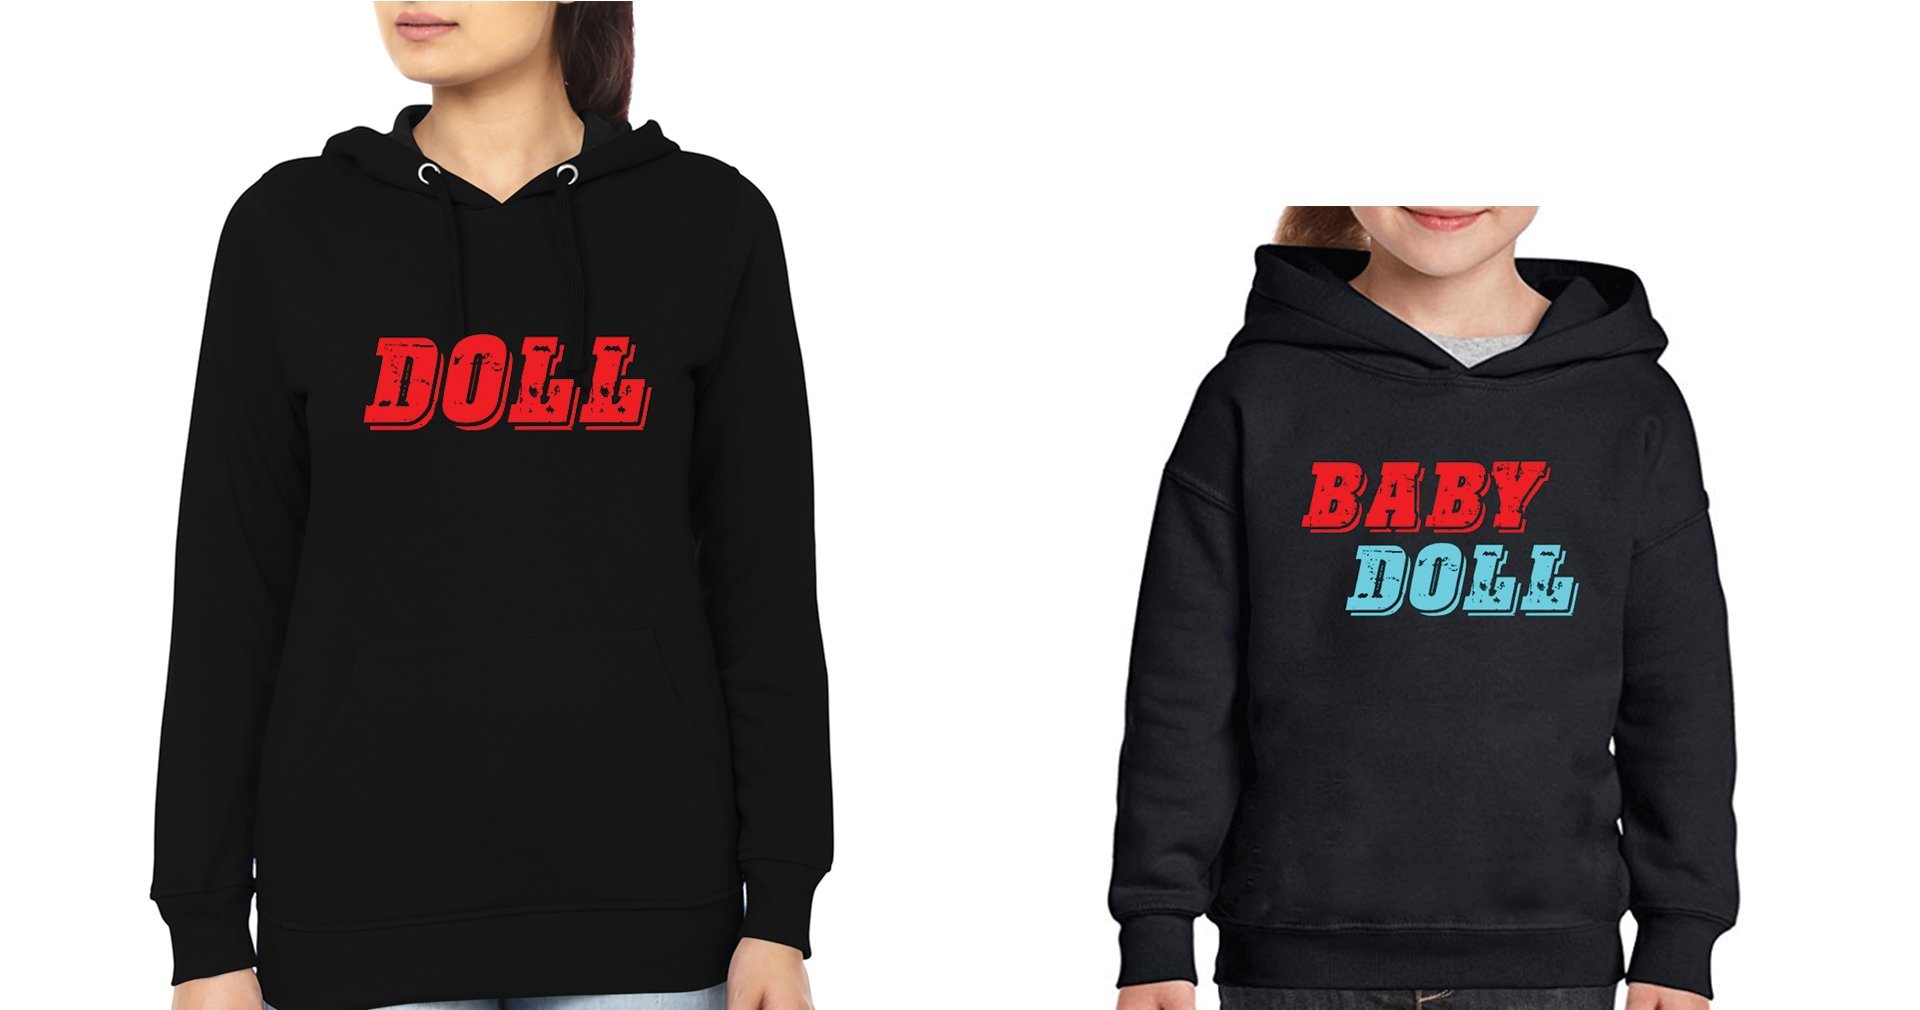 Doll Baby Doll Mother and Daughter Matching Hoodies- FunkyTradition - FunkyTradition